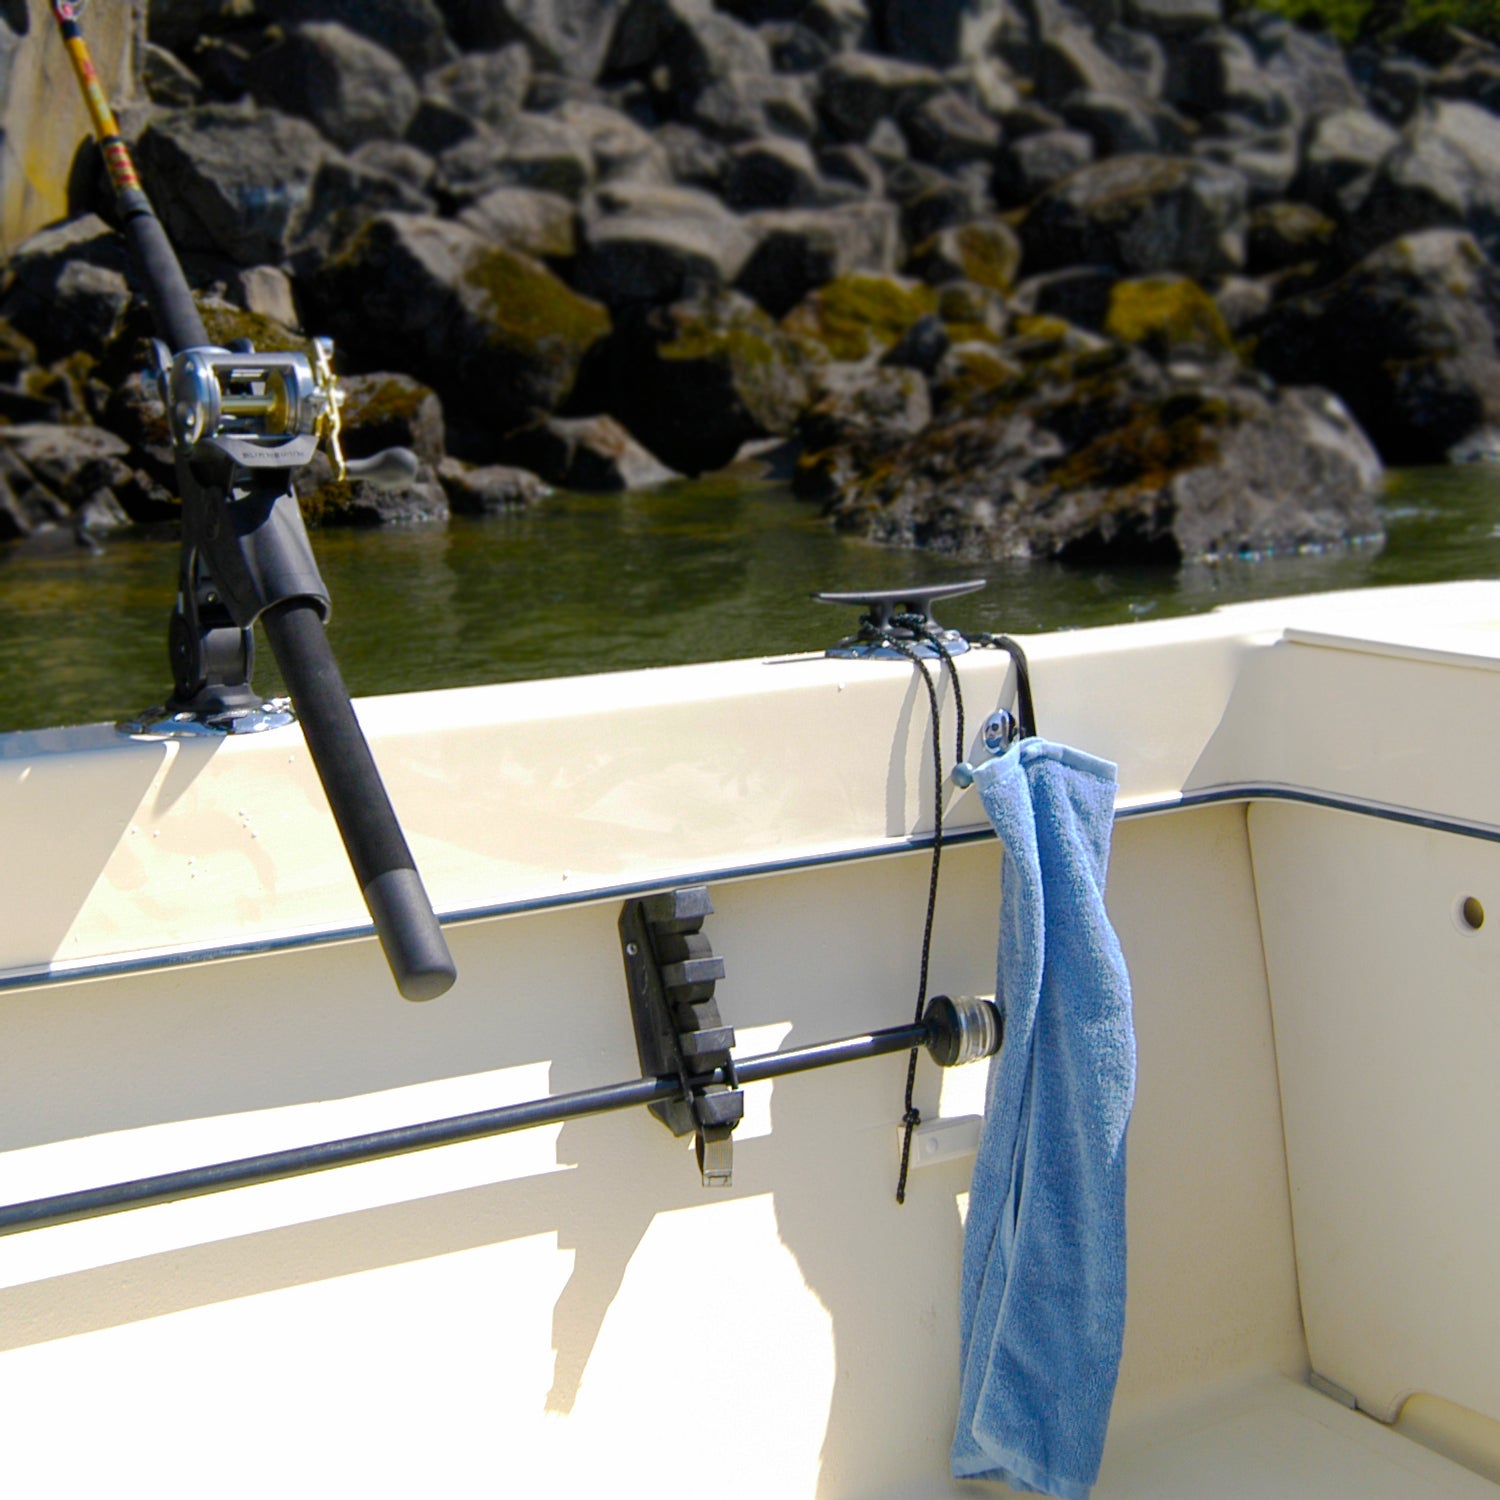 The Burnewiin TW1010 Burnewiin Towel next to an RH3740 Rod Holder clipped to a GM650 mount on the starboard gunwale of a fishing boat. 